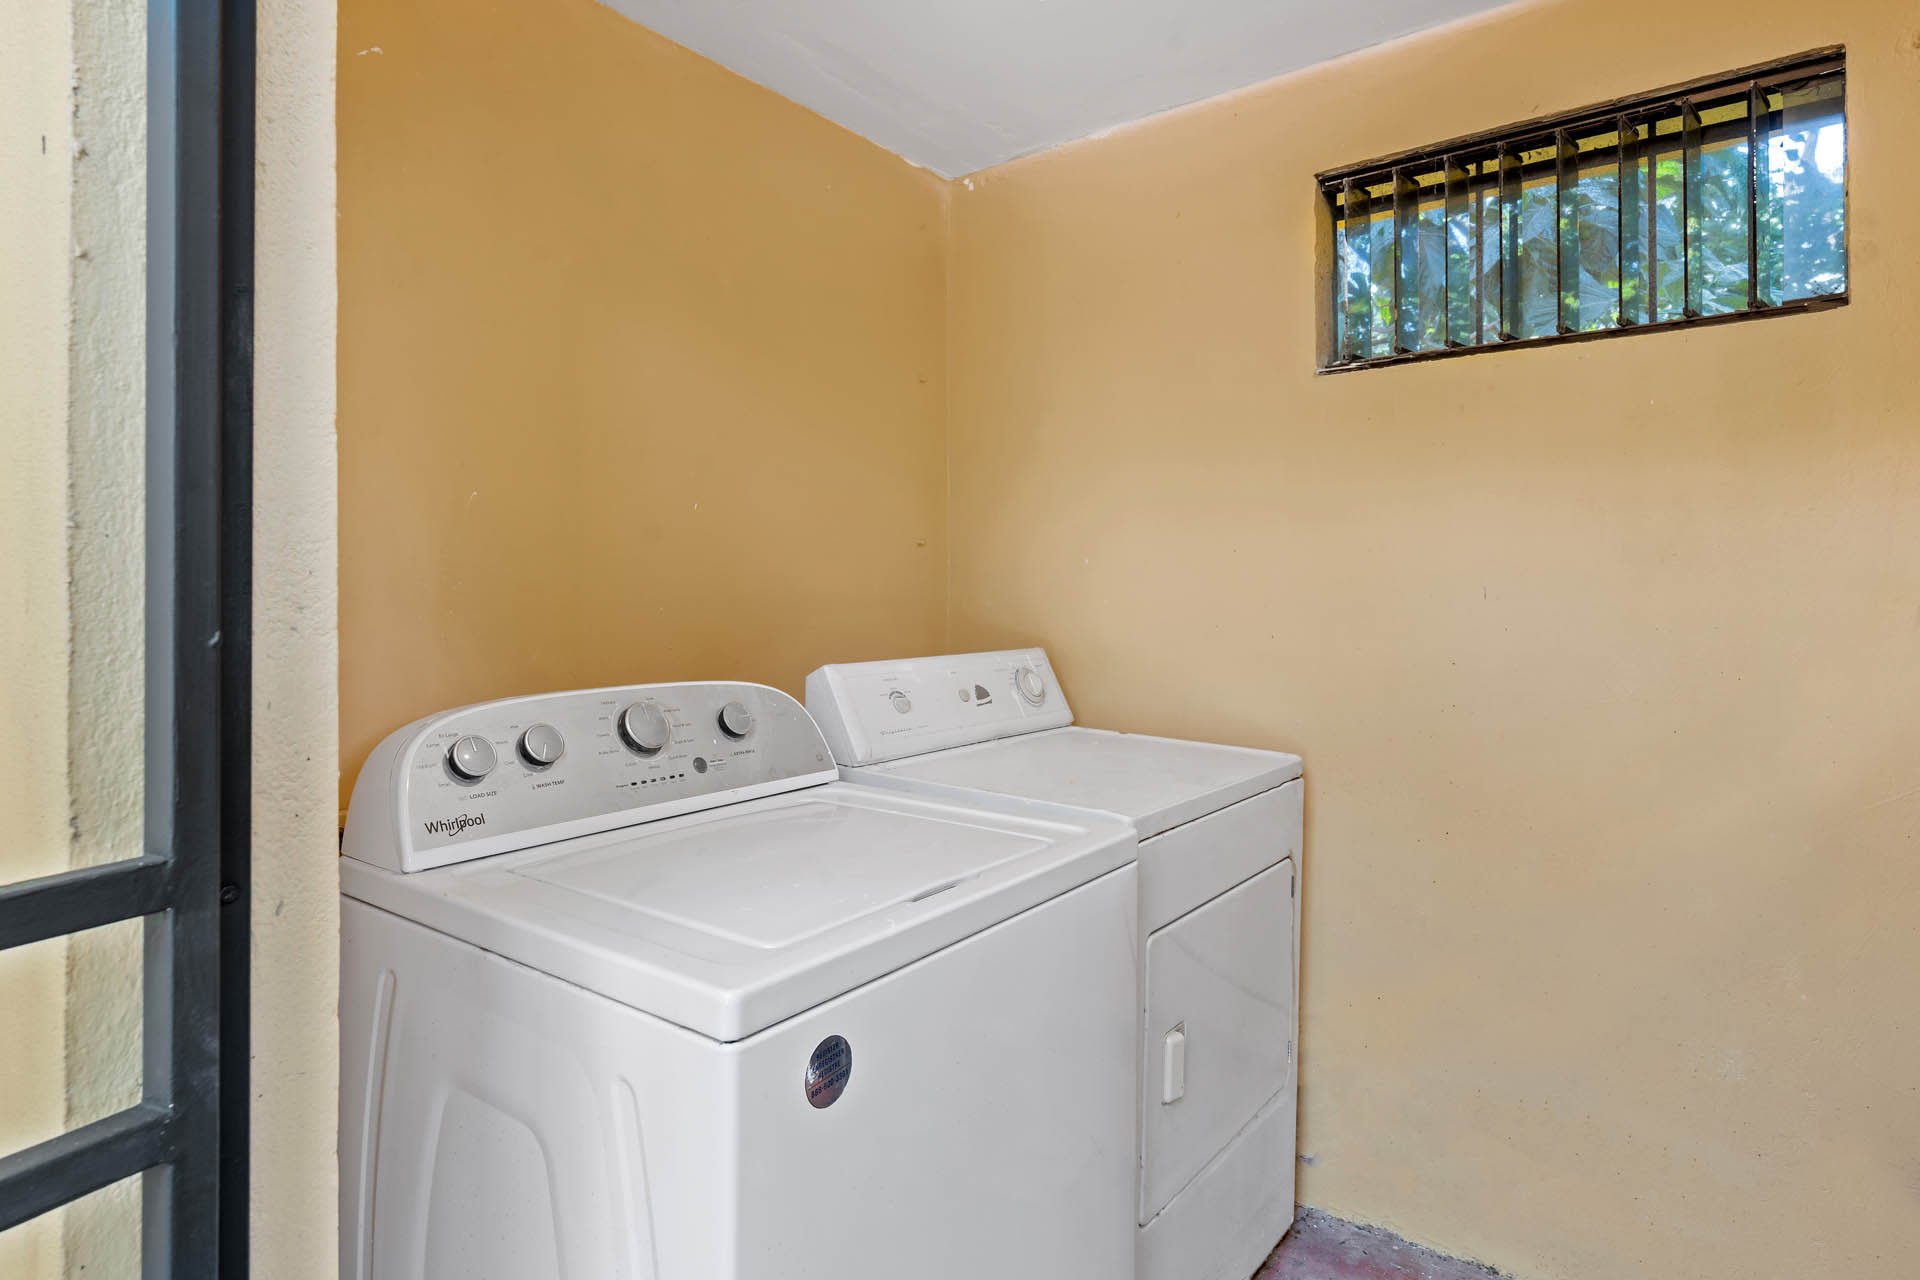 Wash and dryer area